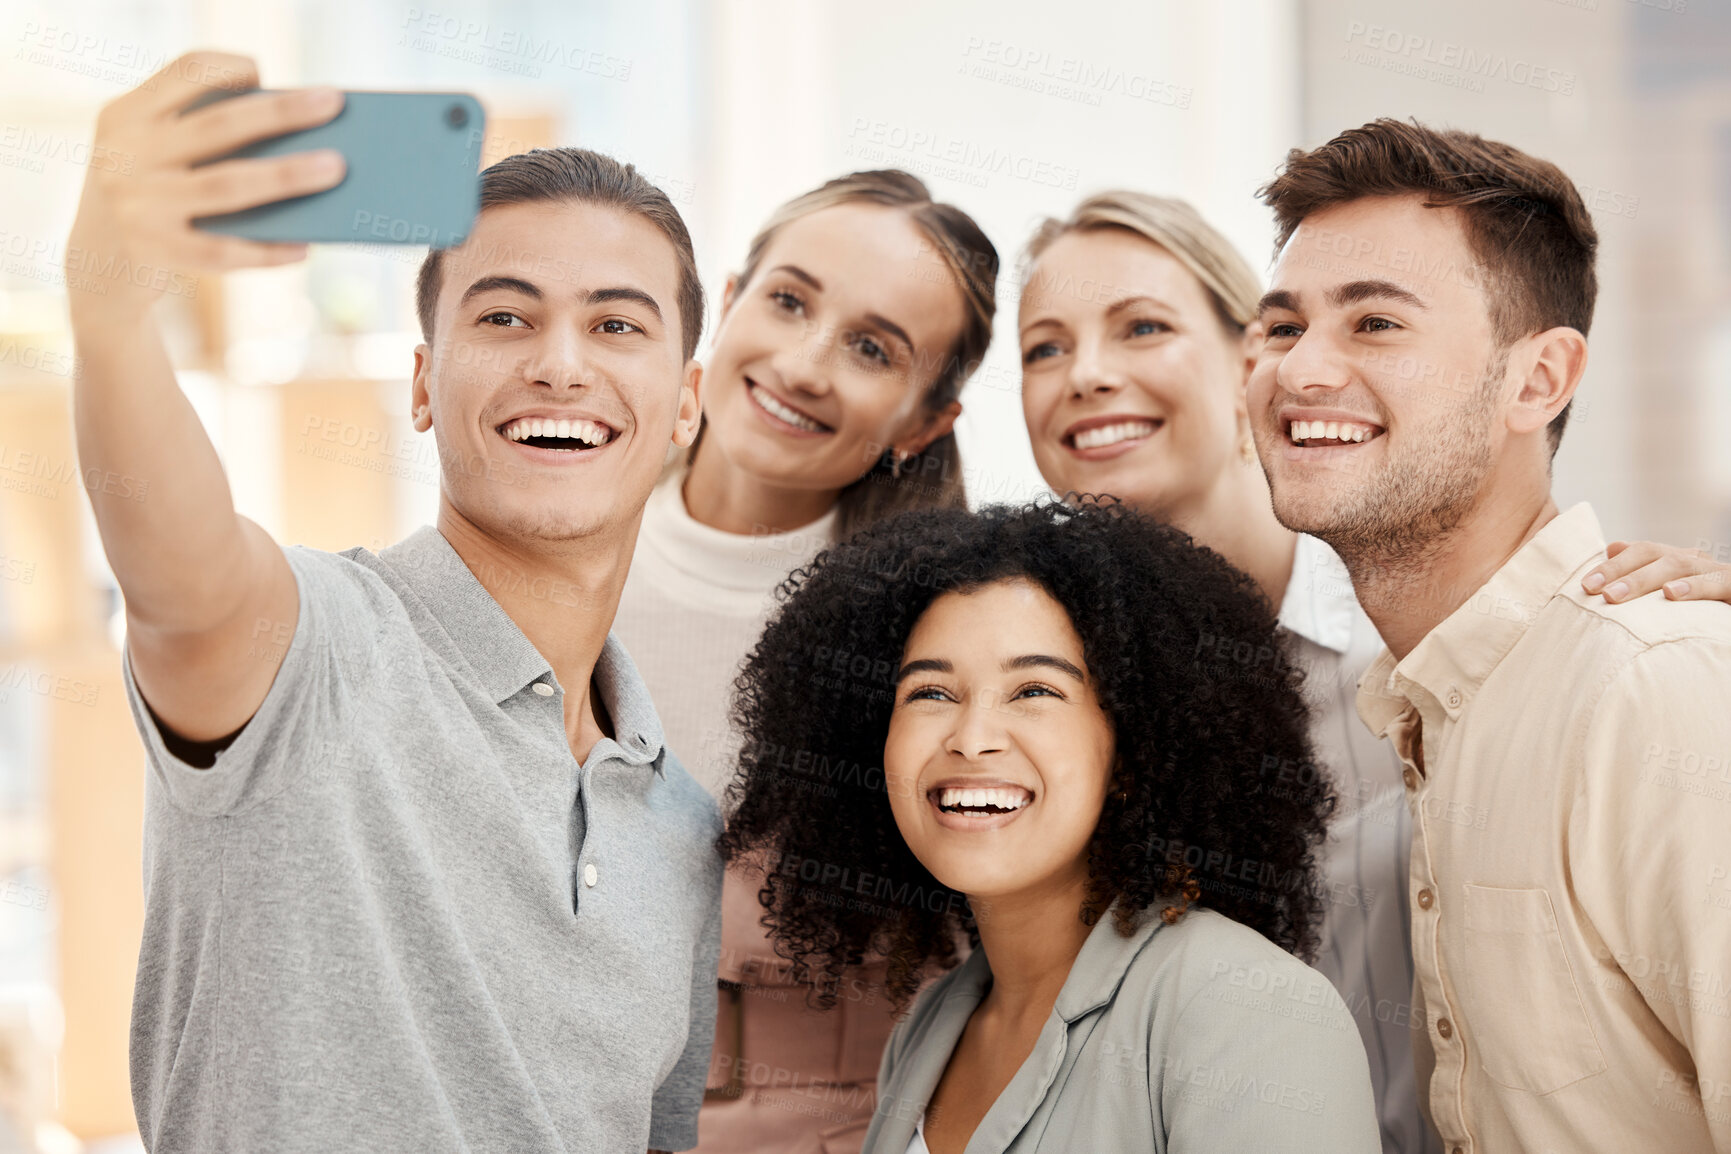 Buy stock photo Diversity work, happy group selfie with phone in office for solidarity or team building in marketing startup. Multicultural team smile, smartphone photo together or workplace happiness community